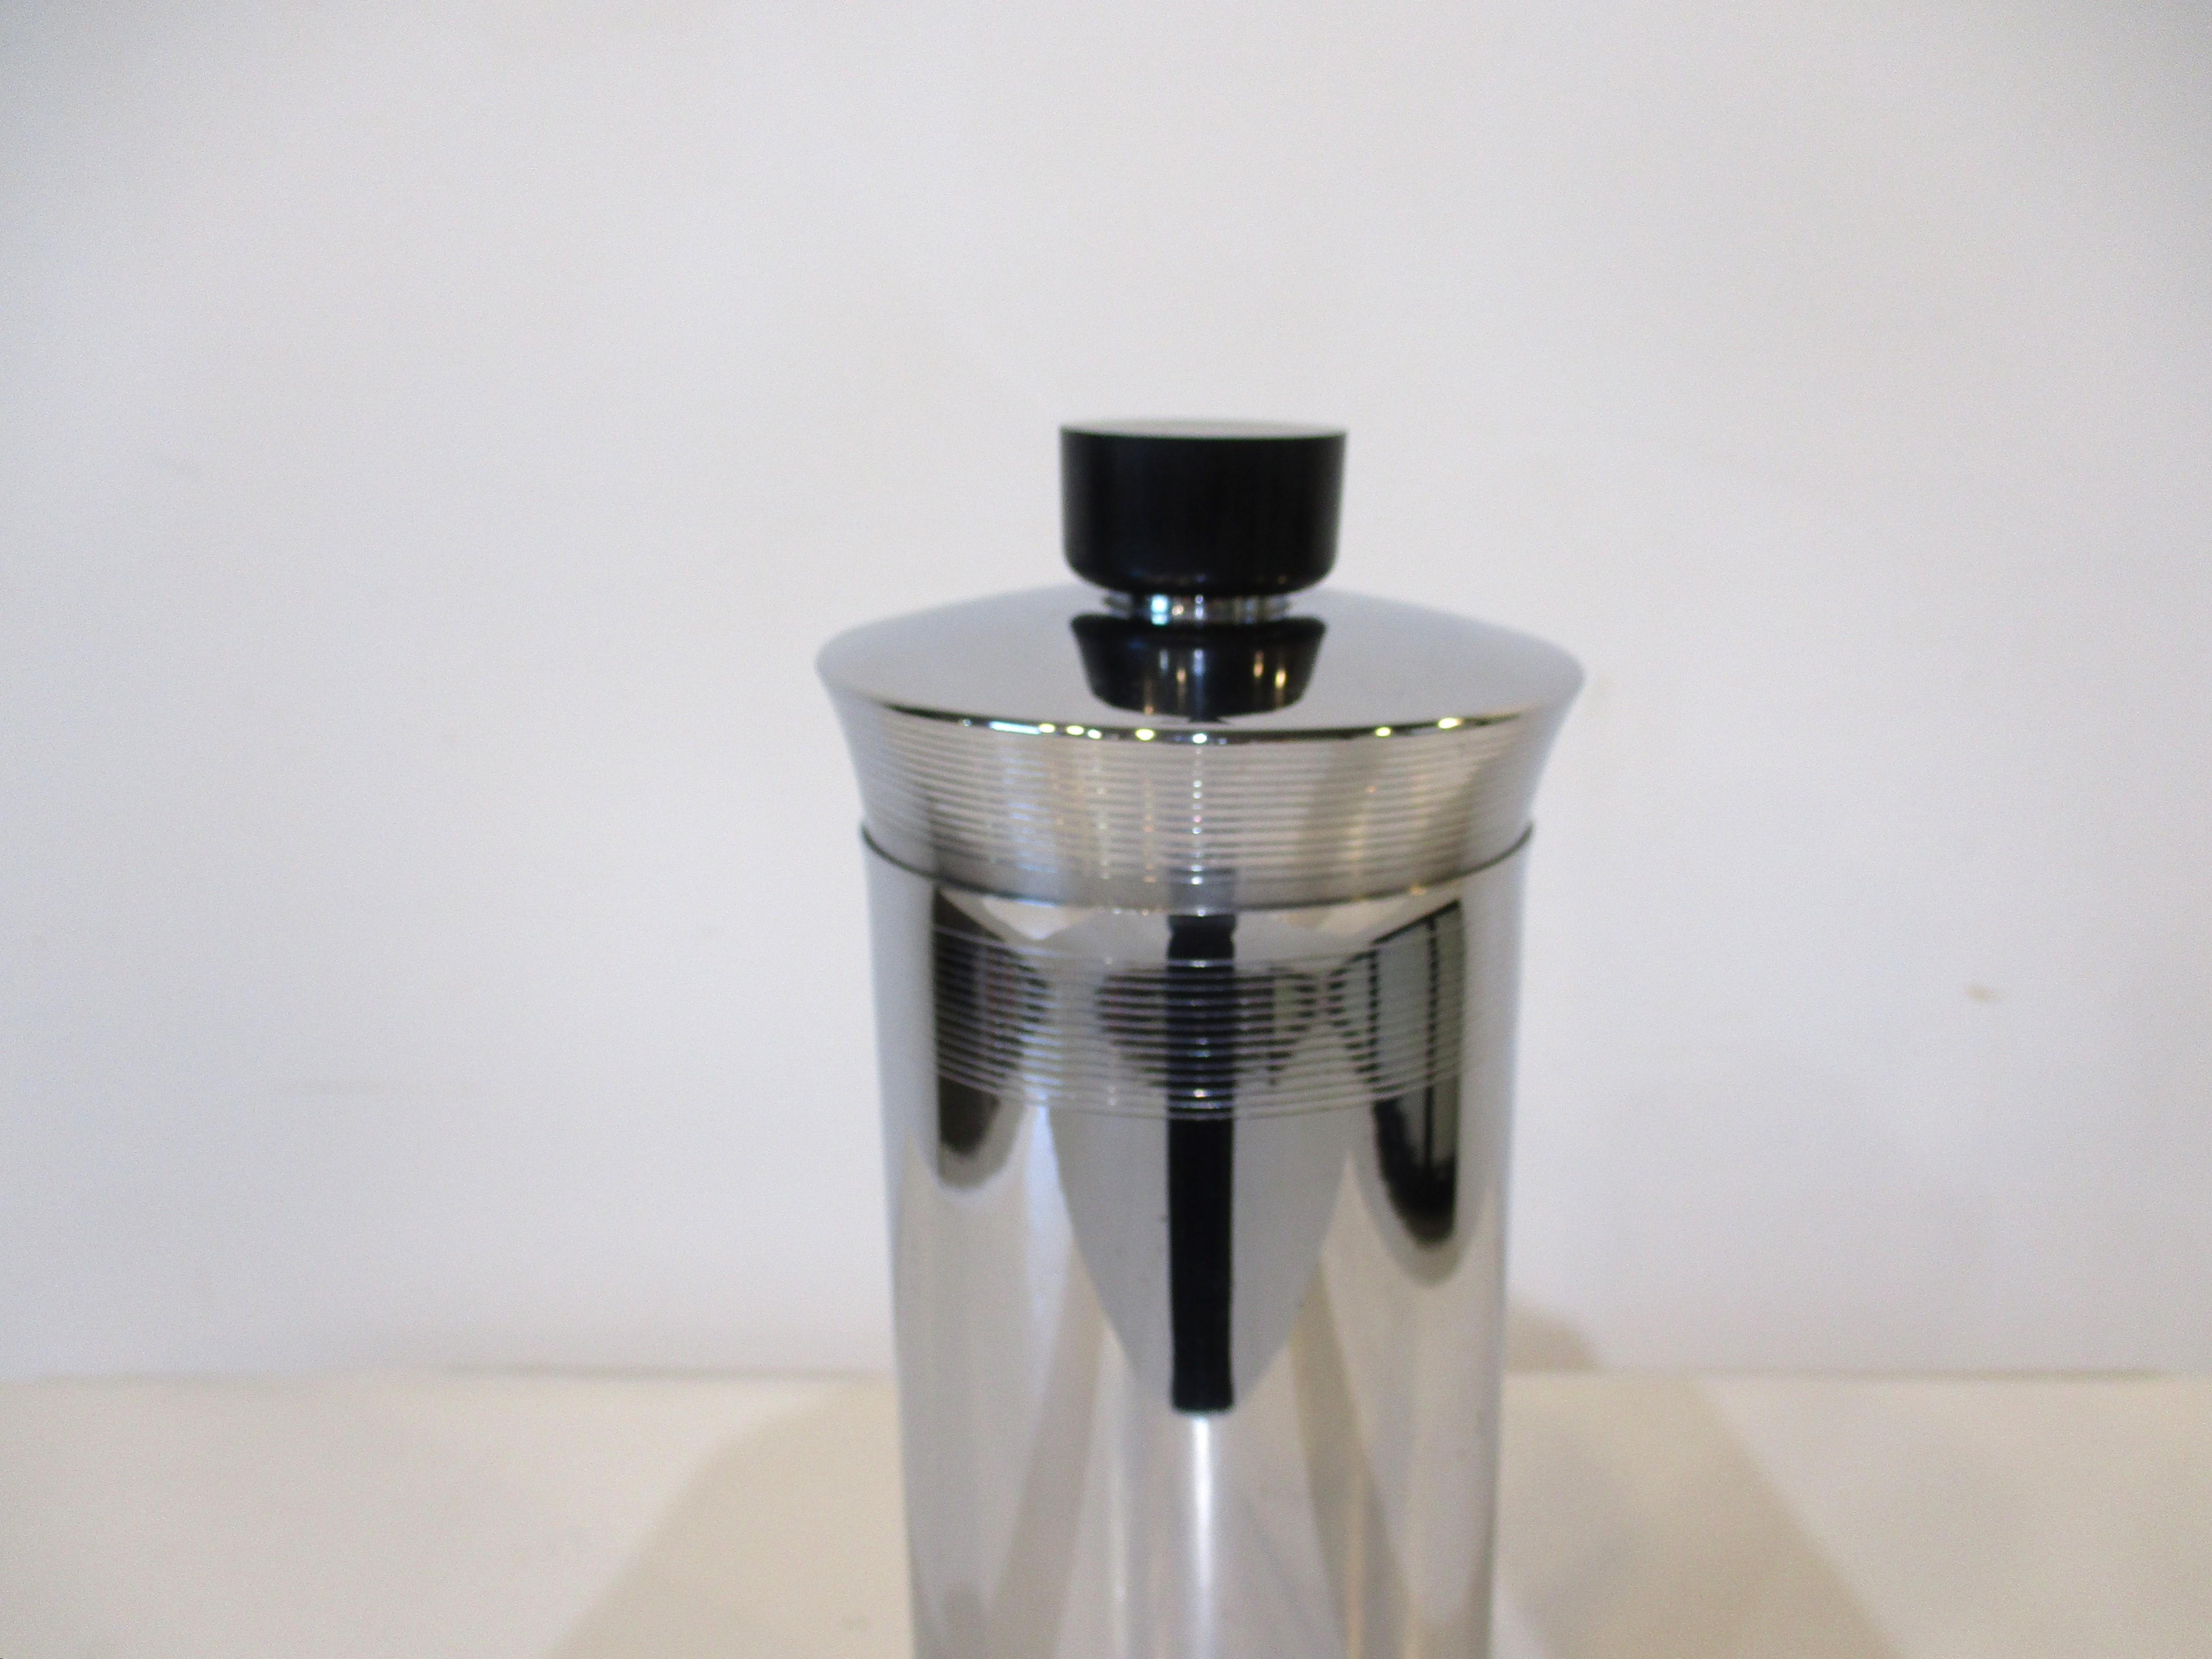 A chrome Art Deco cocktail shaker with ribbed grooves to the top and bottom section of the container. The lid has matching grooves with built in strainer topped with a black bakealite cap. Manufactured and designed in the manner of Manning Bowman.